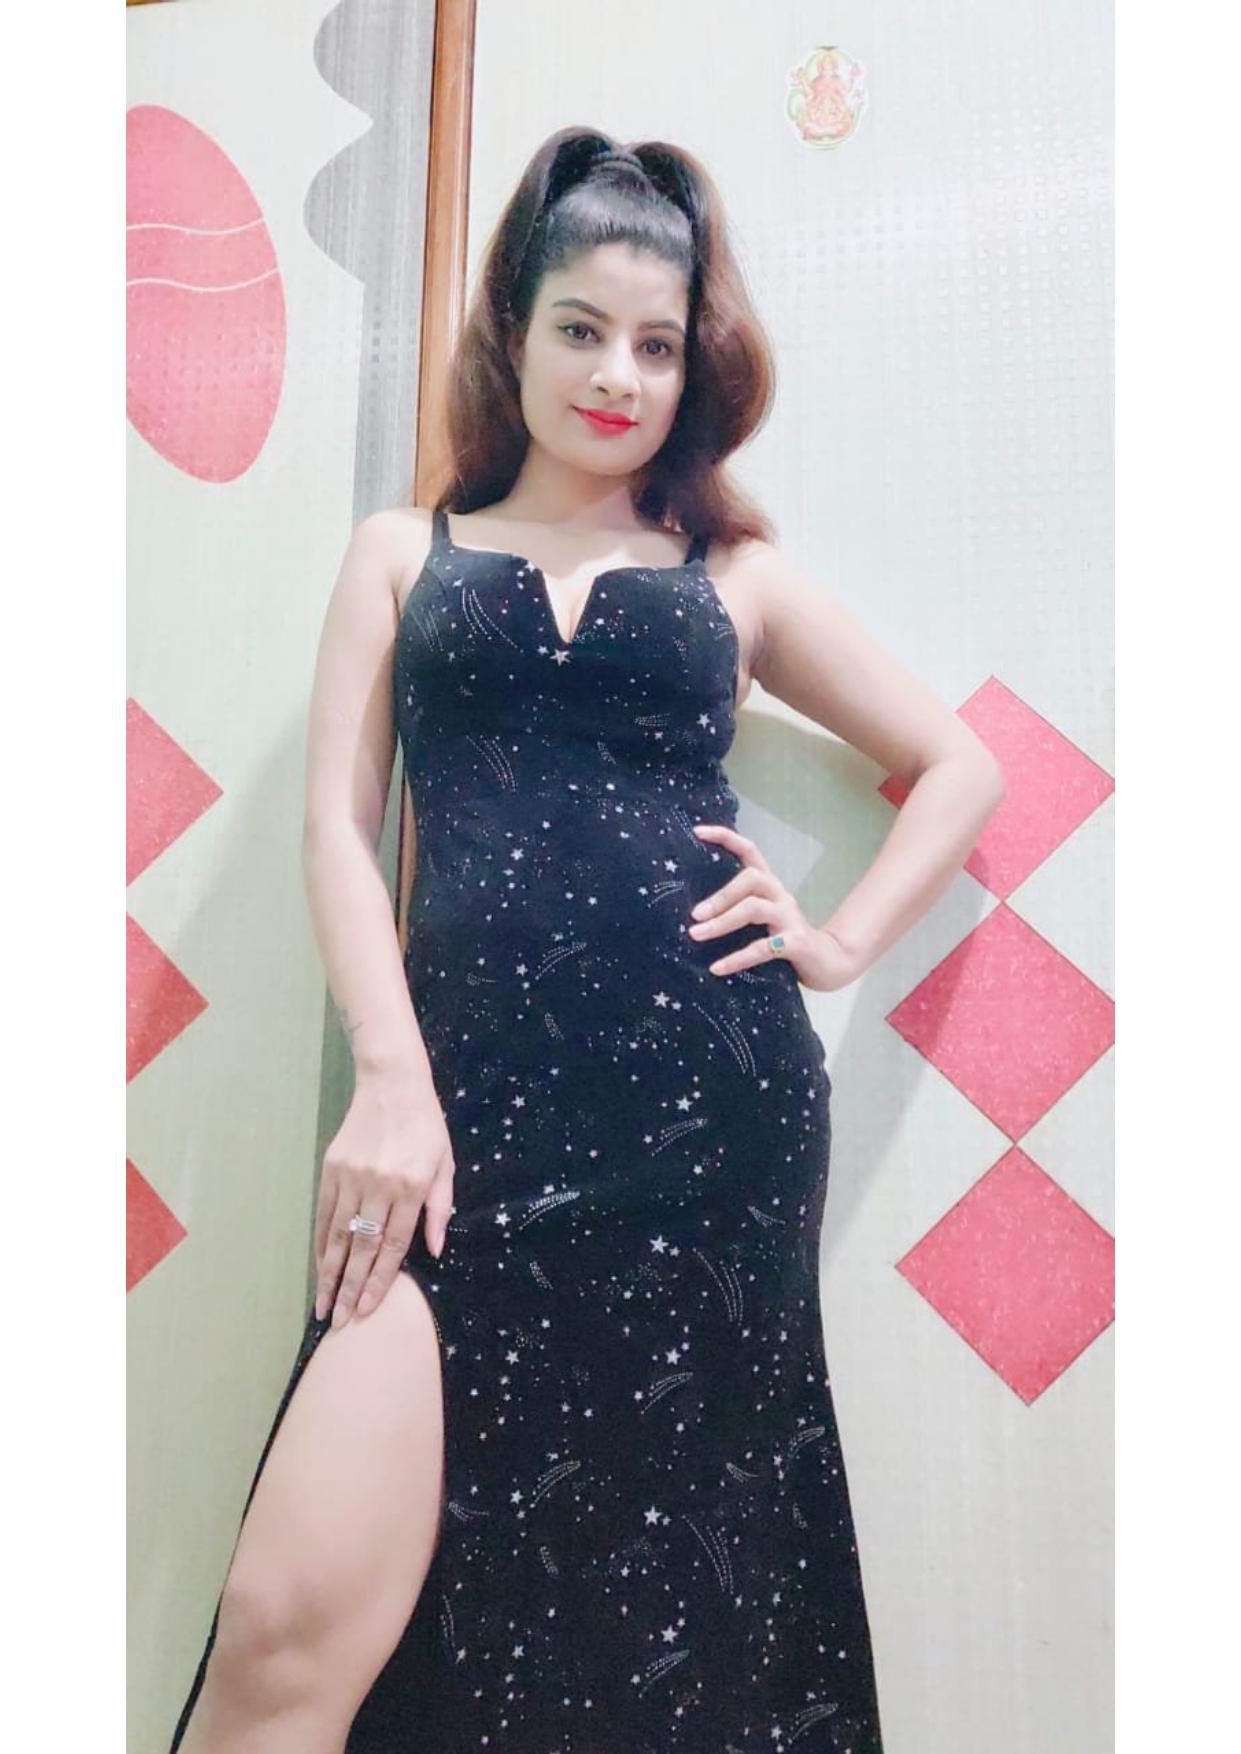 Book online kannada call girls in bangalore near by area